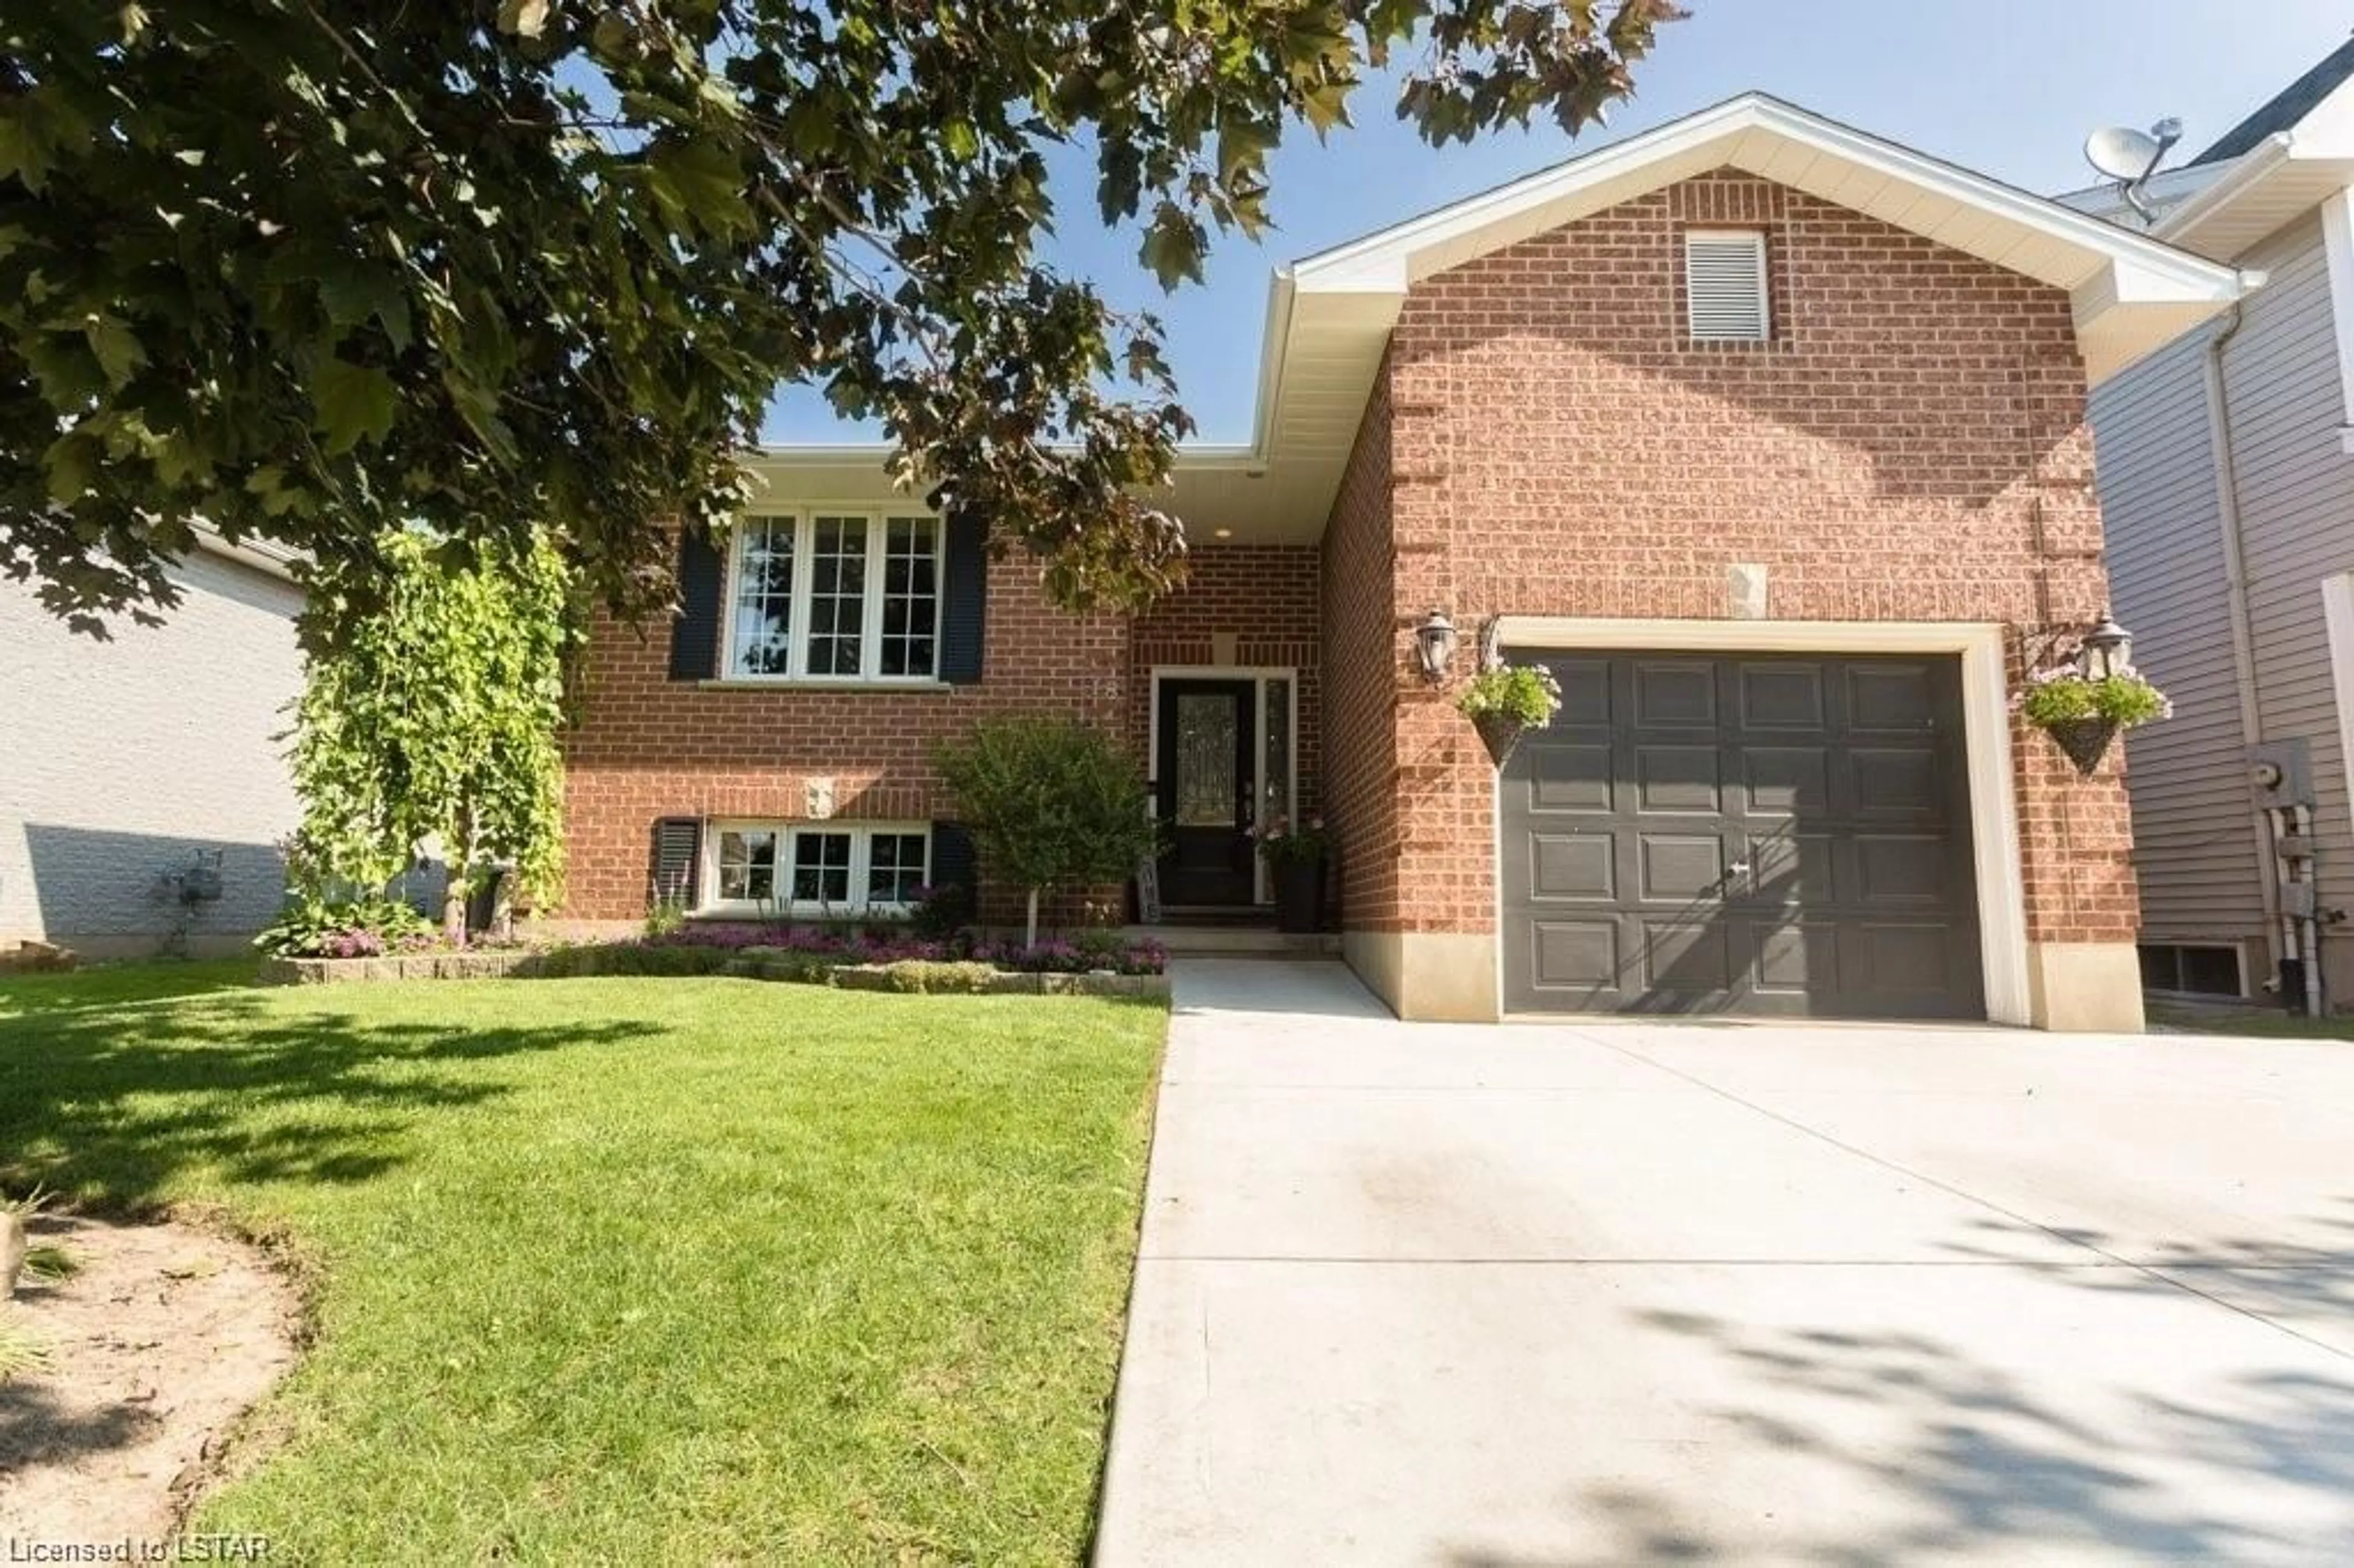 Home with brick exterior material for 78 Oldewood Cres, St. Thomas Ontario N5R 6B3